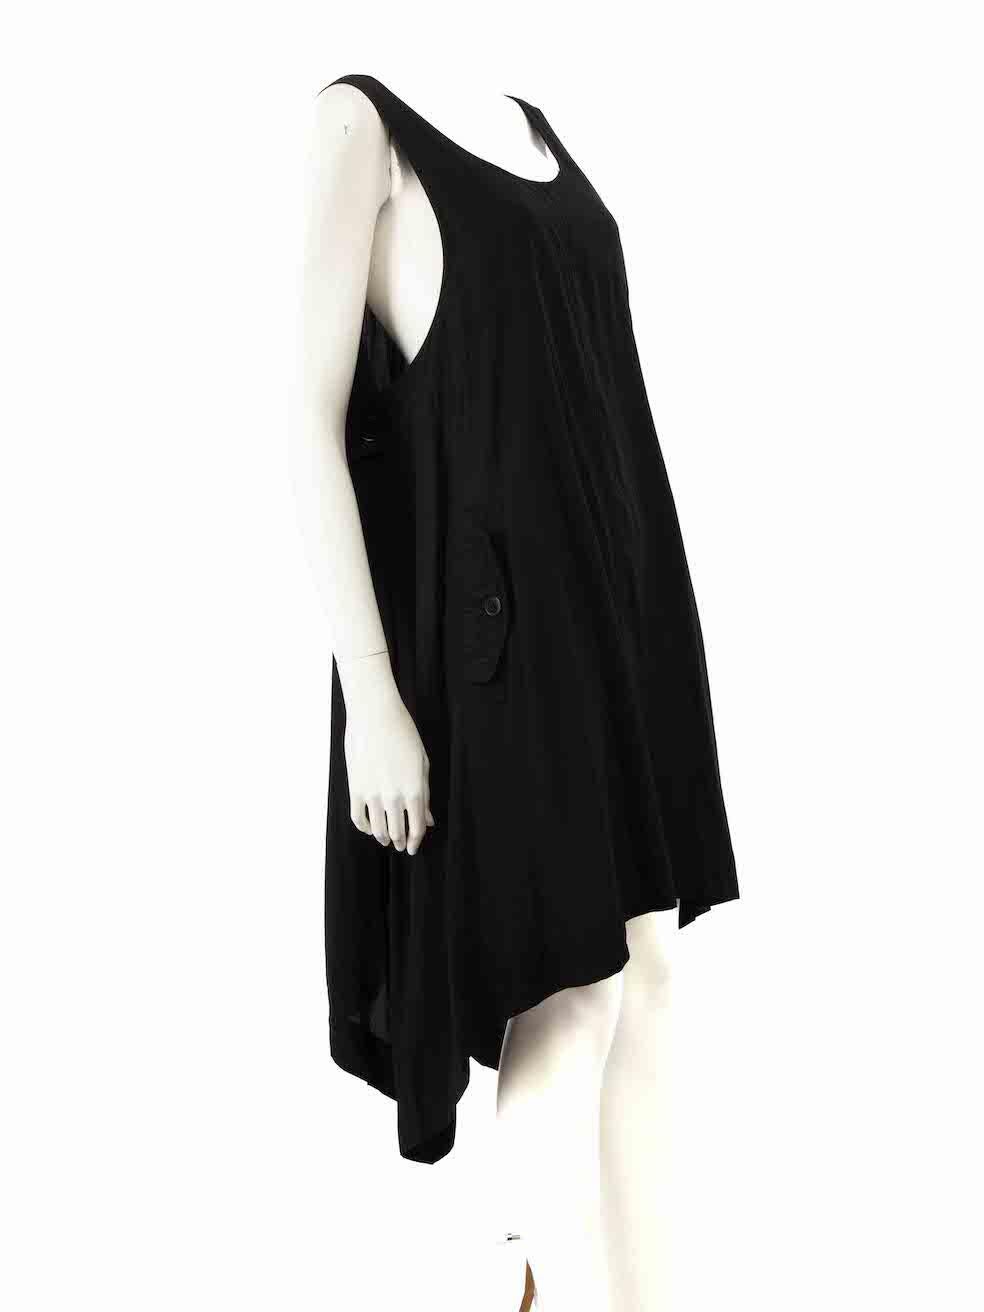 CONDITION is Very good. Minimal wear to dress is evident. One of the button strap on left underarm is missing on this used Y's by Yohji Yamamoto designer resale item.
 
 
 
 Details
 
 
 Black
 
 Cupro
 
 Dress
 
 Sleeveless
 
 Knee length
 
 Round